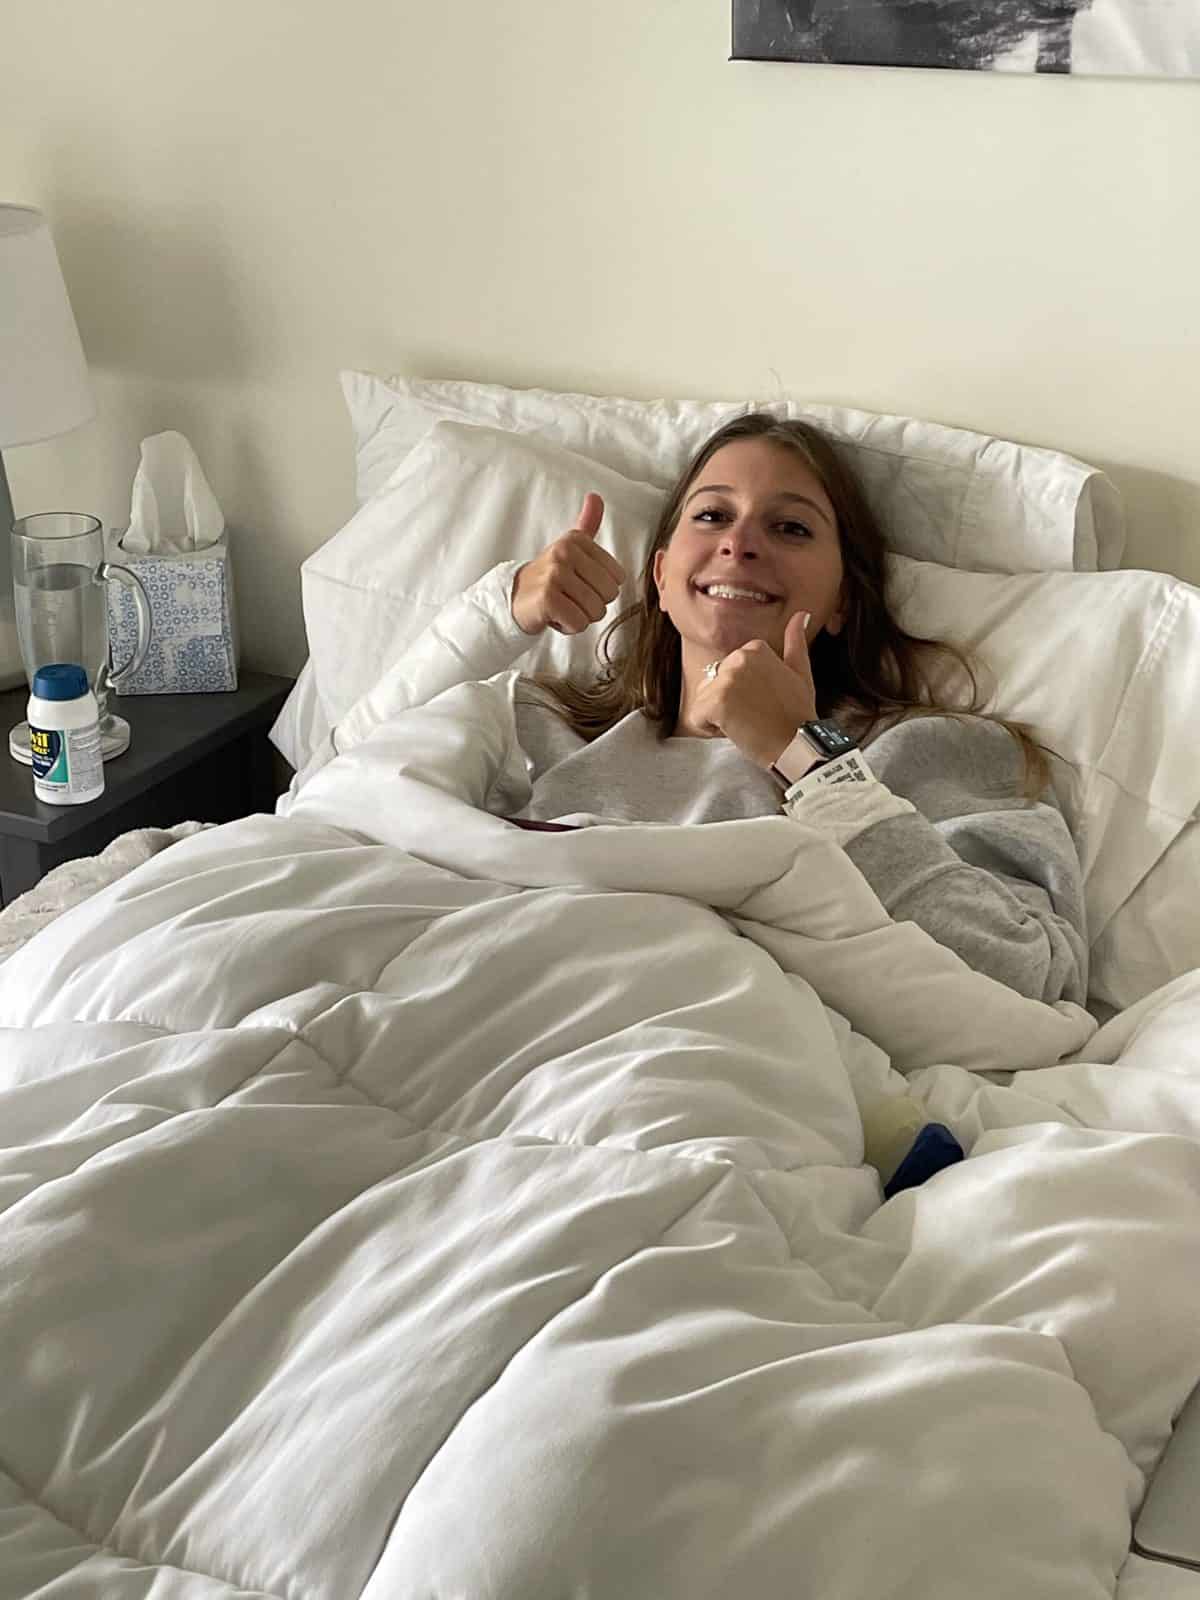 A woman laying in bed with a hospital bracelet on, giving a thumbs up sign.